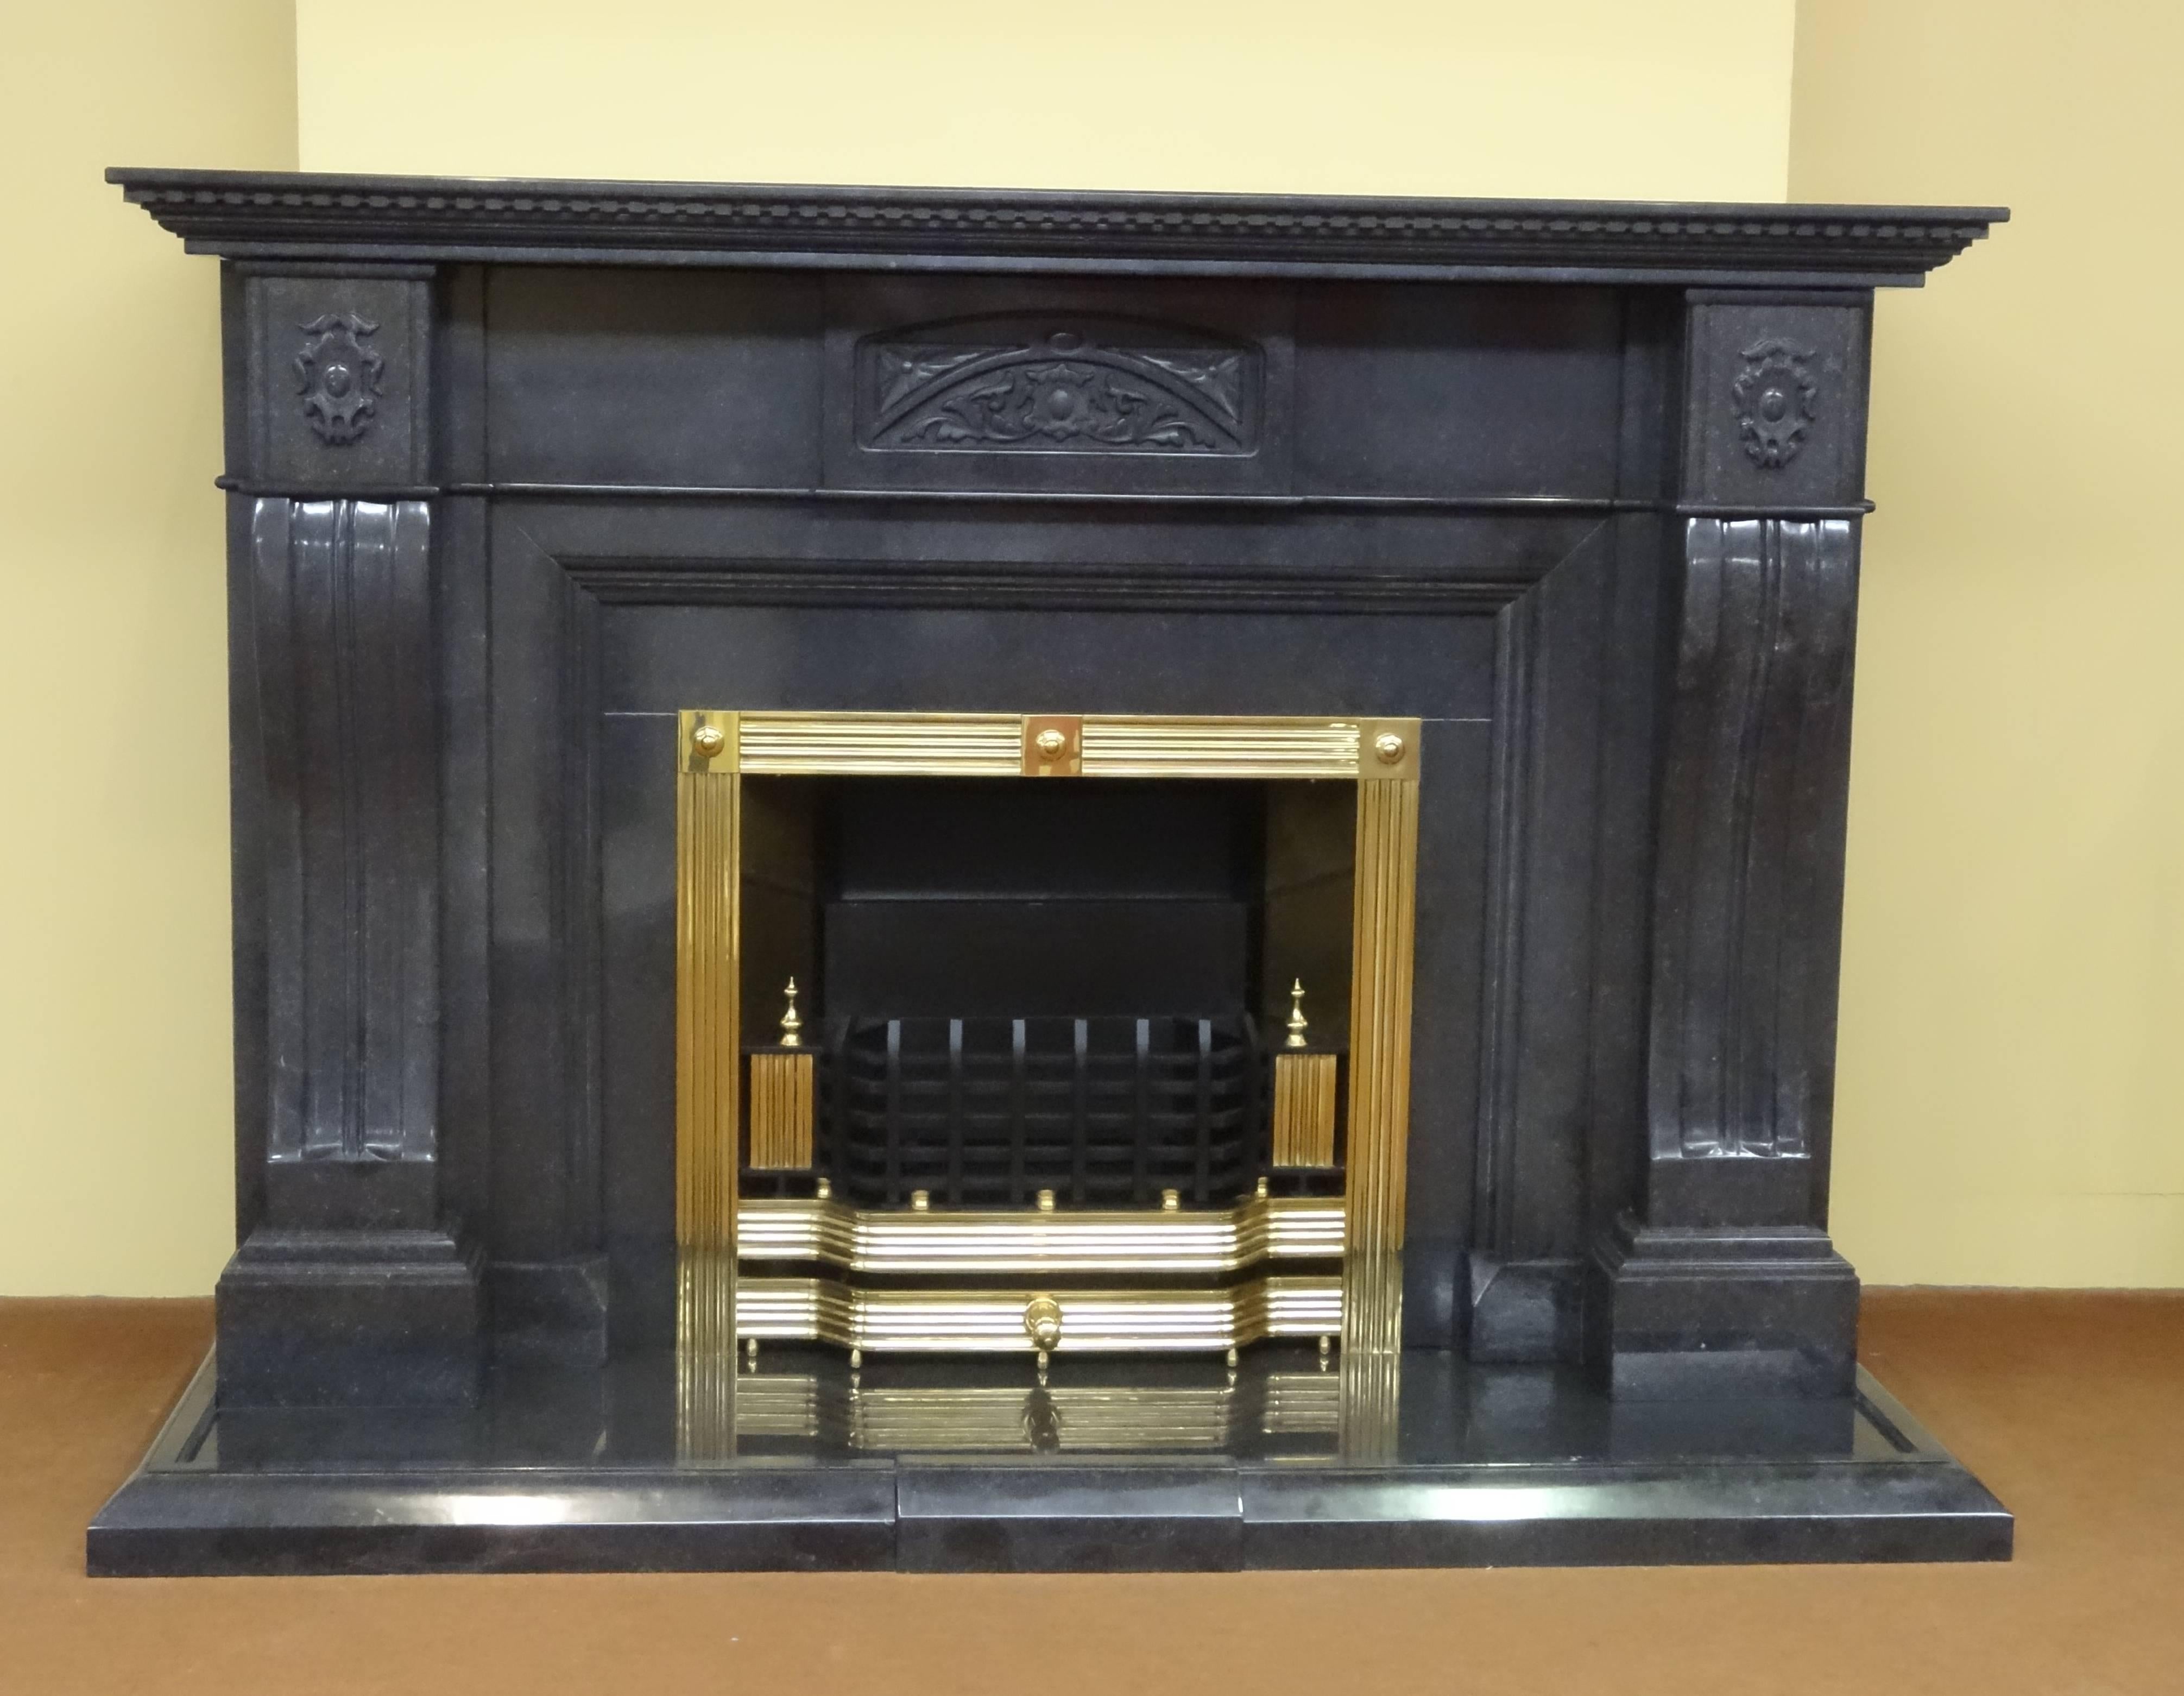 We created this fireplace in polished Kilkenny Black Marble, this is a fossilized marble native to Ireland. The fireplace incorporates a register grate created in 0.5 inch solid brass; a matching marble hearth with marble fender as